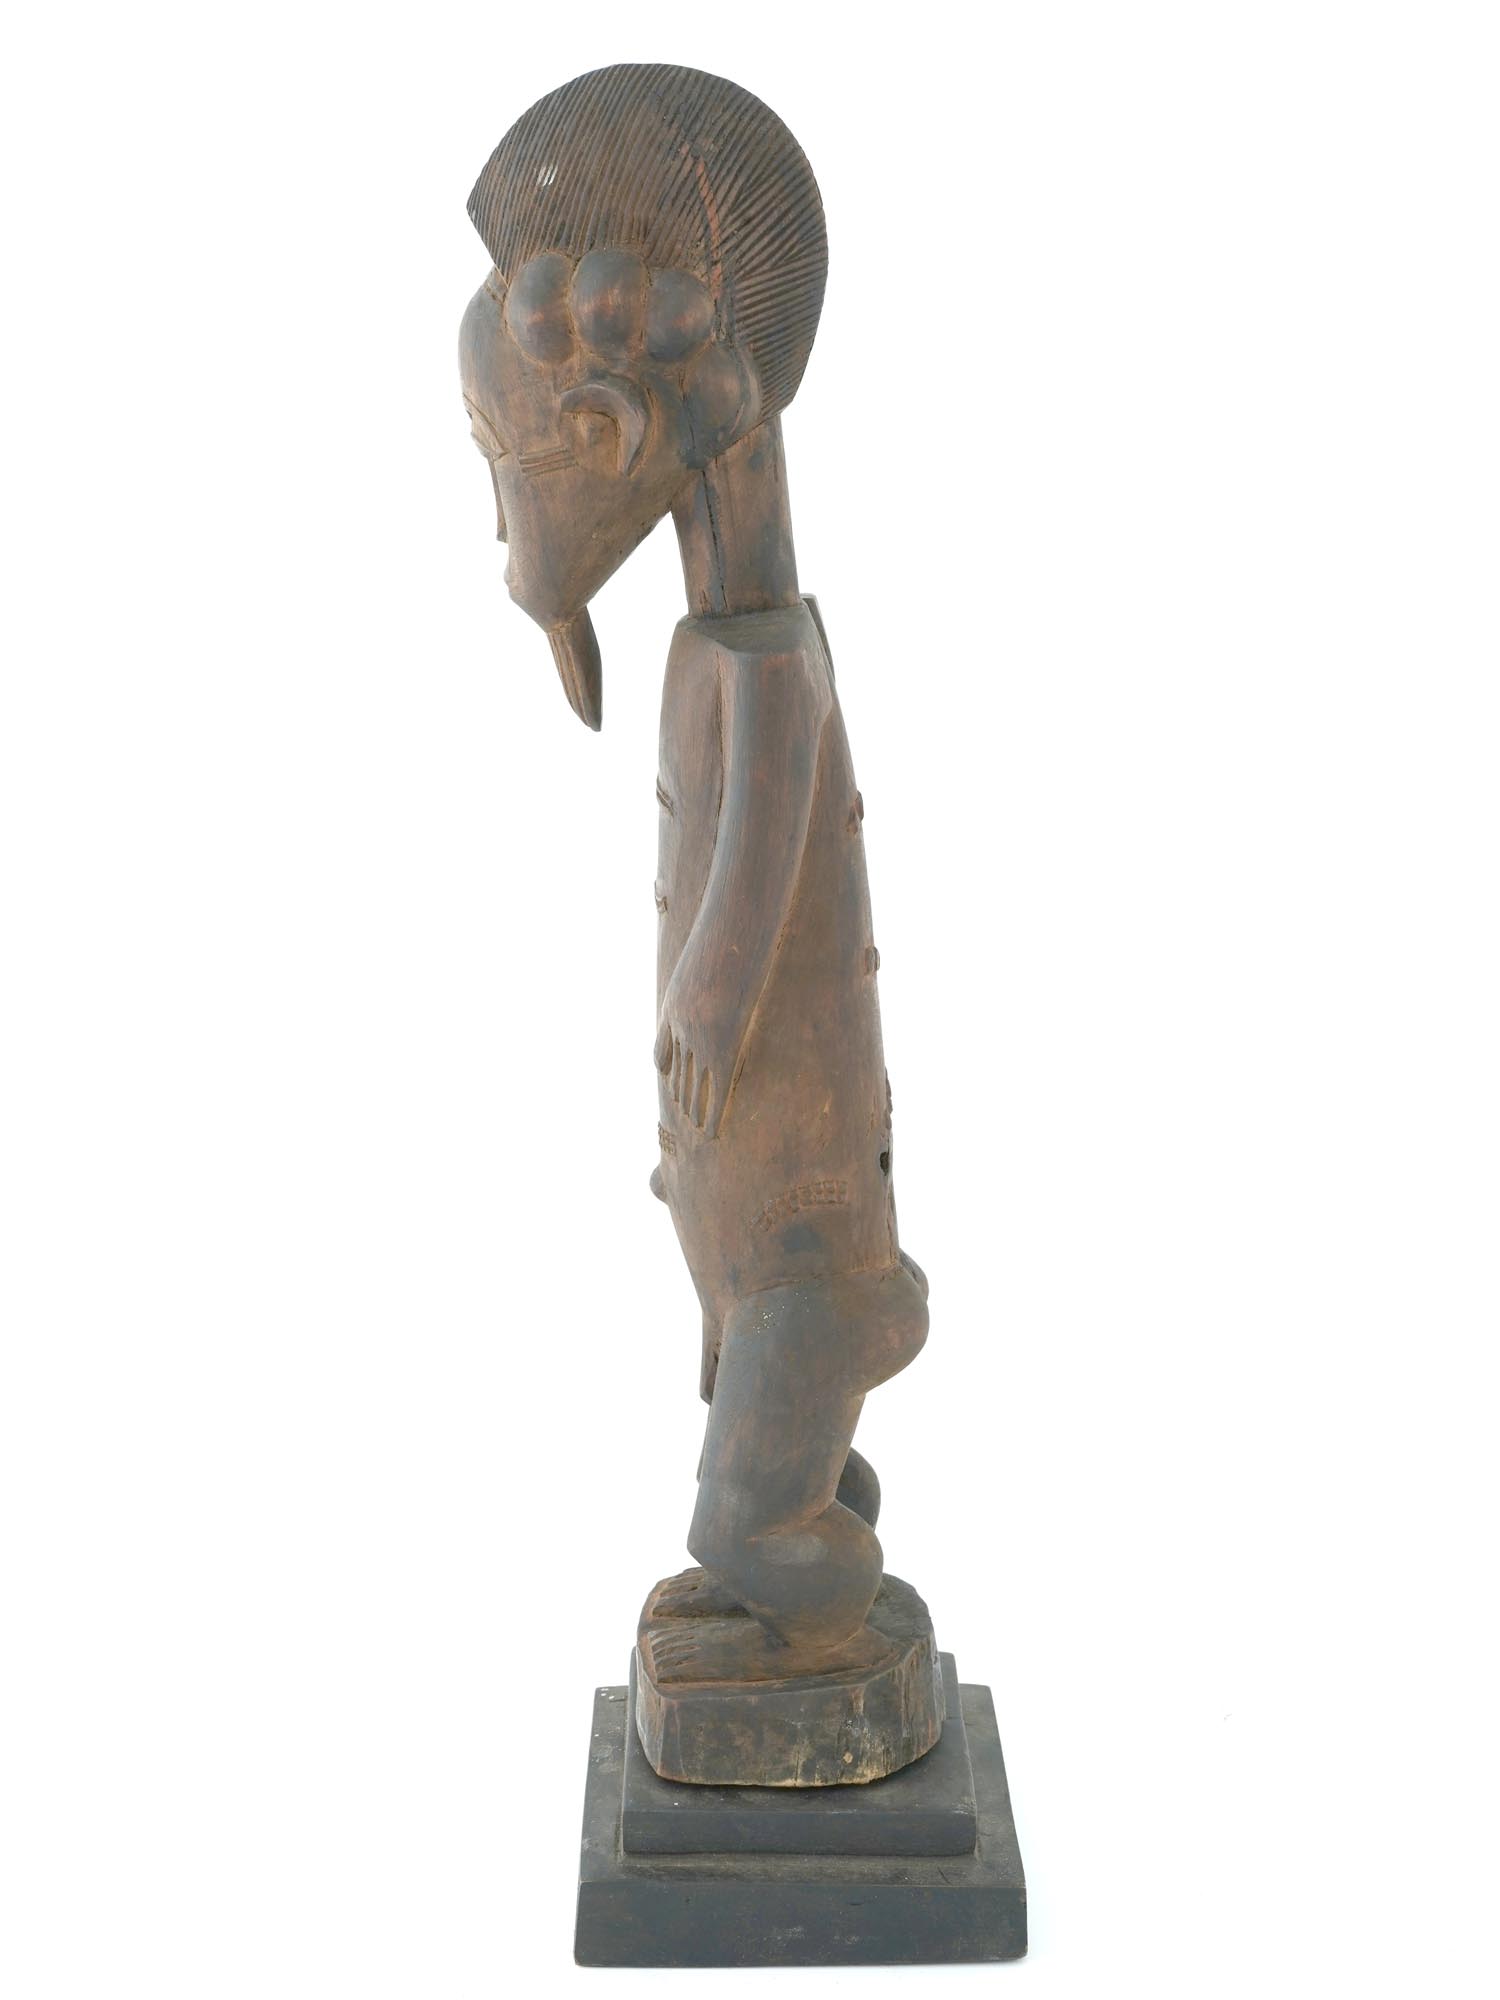 BAOLET WOODEN MALE FIGURINE IVORY COAST WEST AFRICA PIC-2